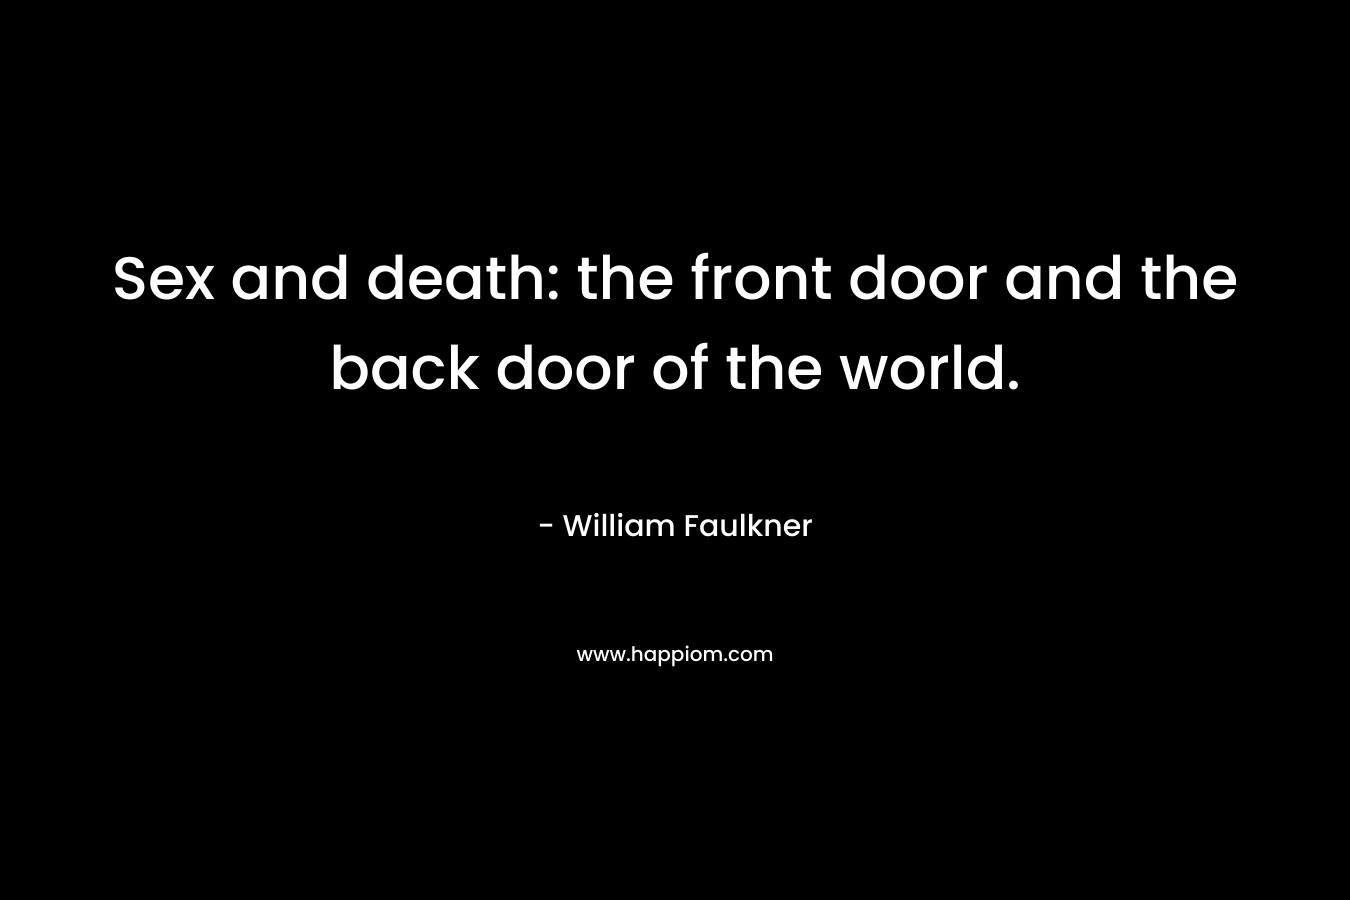 Sex and death: the front door and the back door of the world.